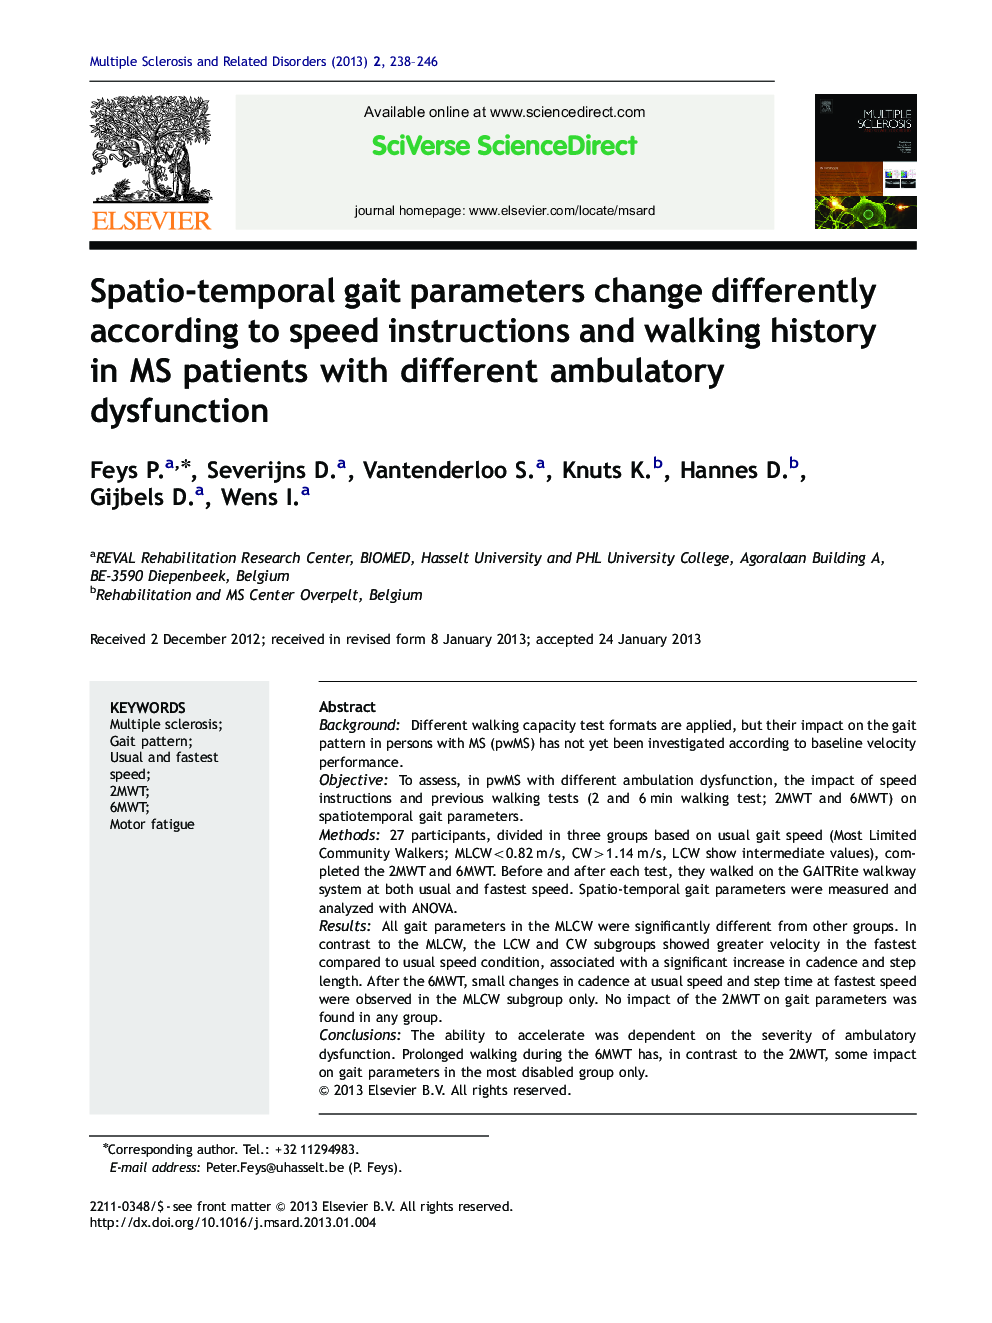 Spatio-temporal gait parameters change differently according to speed instructions and walking history in MS patients with different ambulatory dysfunction